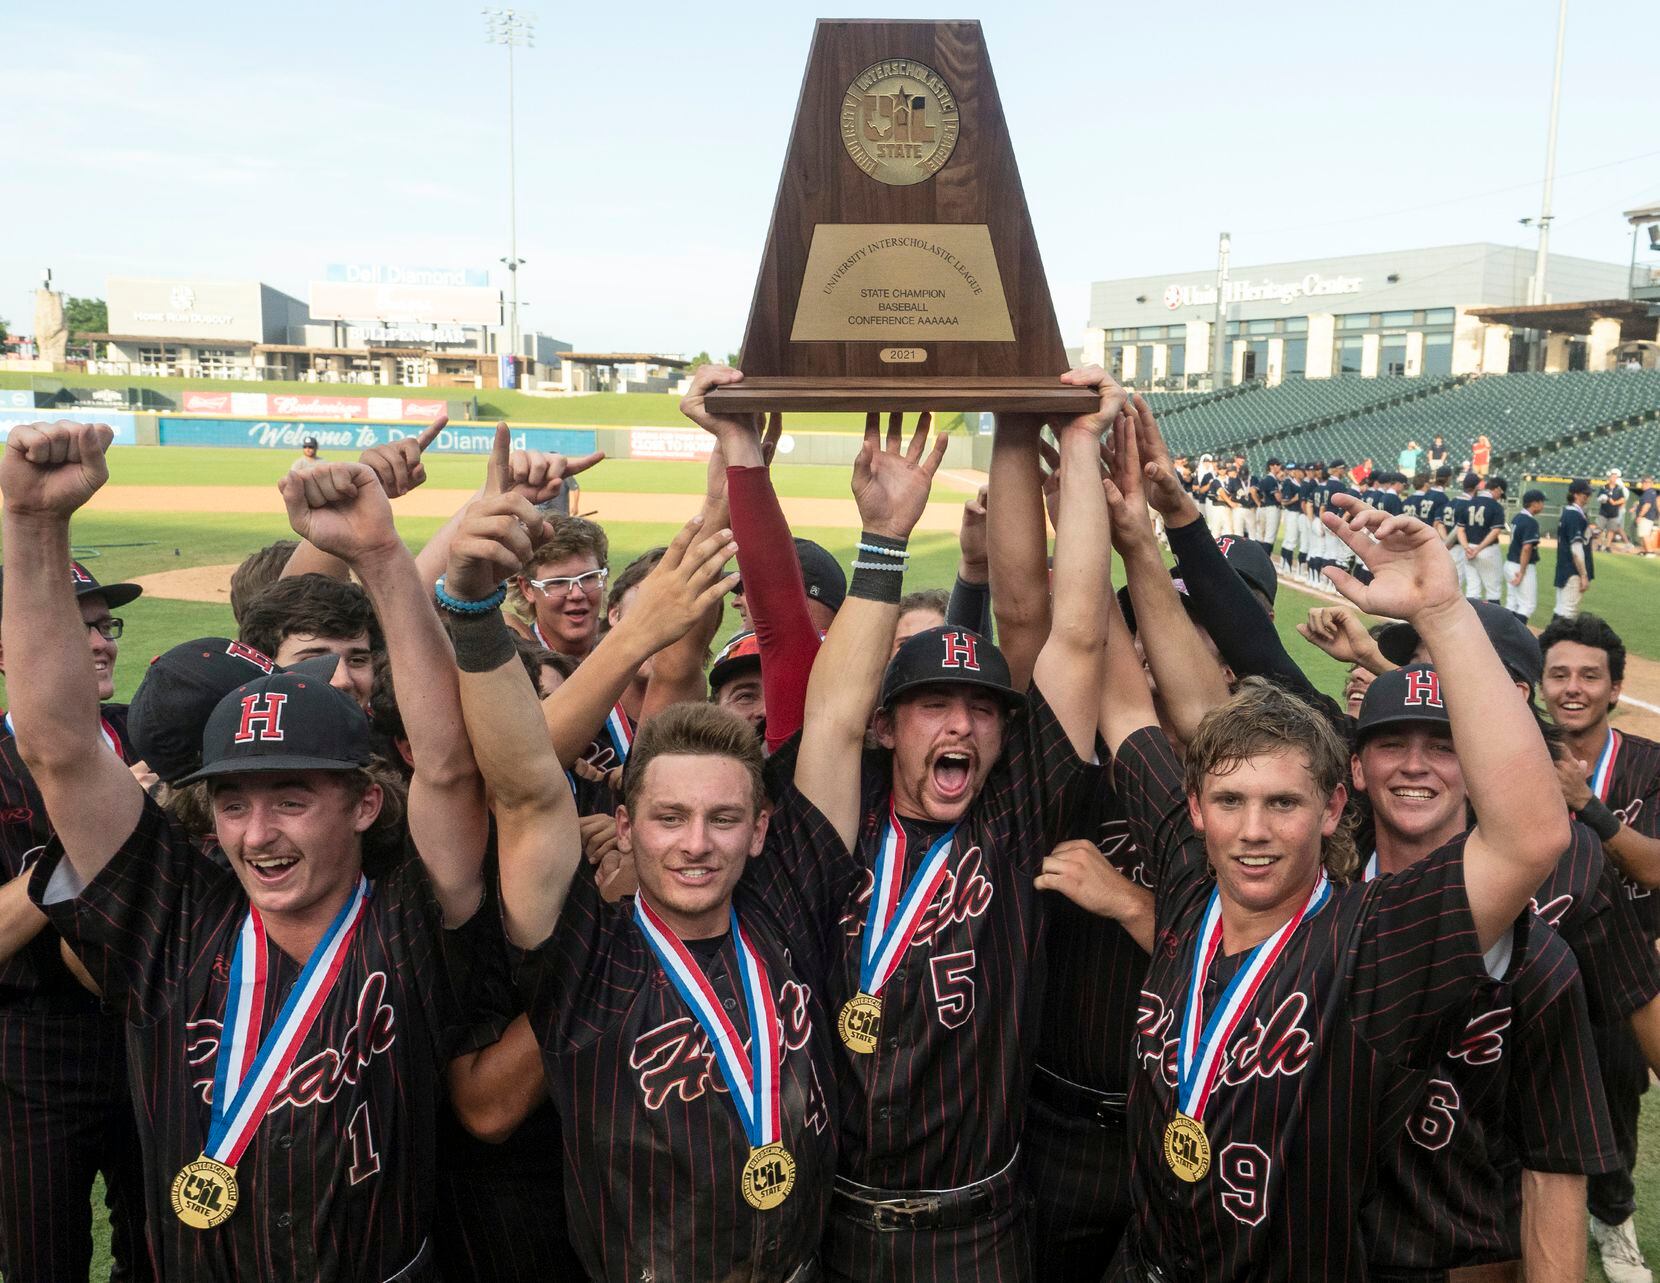 The Rockwall-Heath Hawks team celebrate with the championship trophy after defeating Keller...